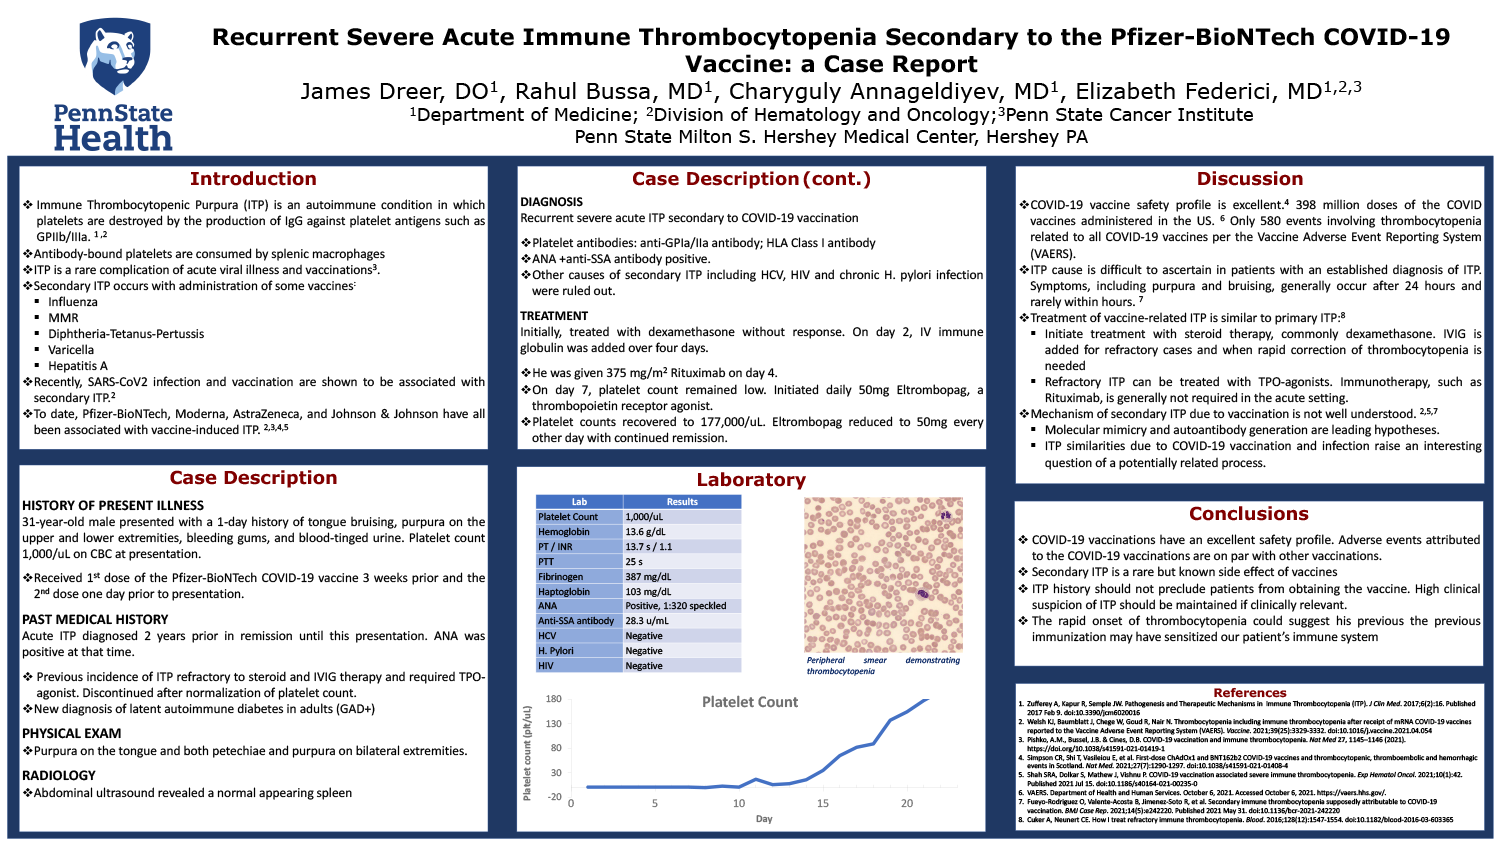 James Dreer - PAE-58-Recurrent-Severe-Acute-Immune-Thrombocytopenia-secondary-to-the-Pfizer-BioNTech-COVID-19-Vaccine-a-Case-Report